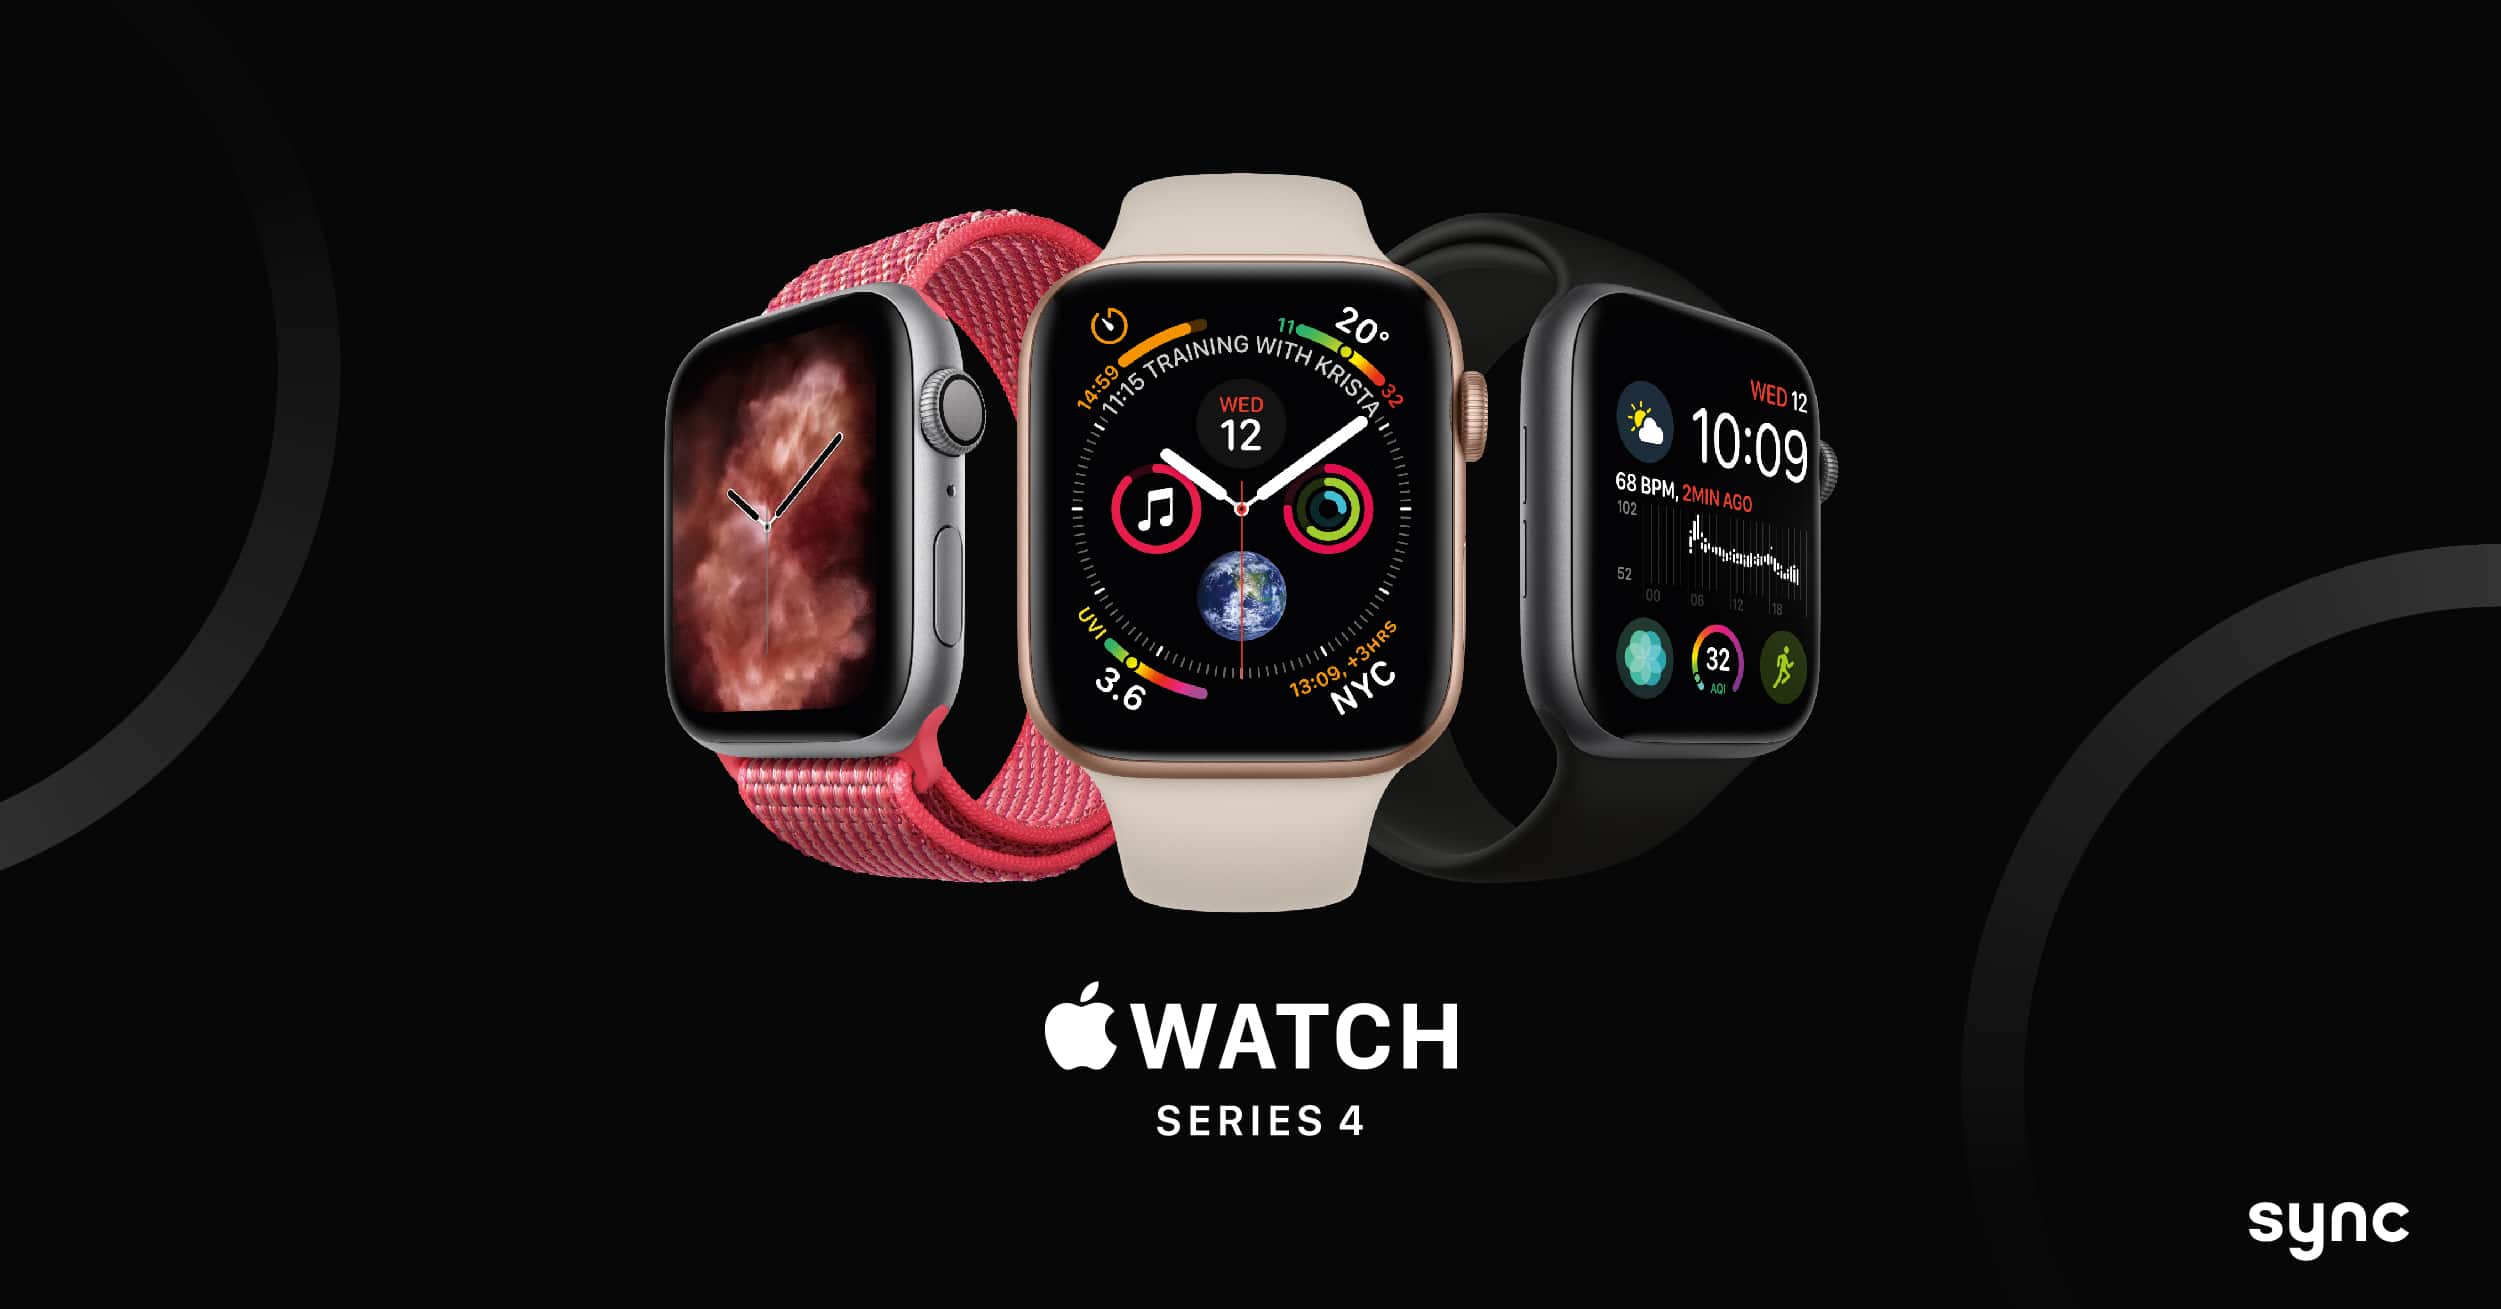 The new Apple Watch Series 4